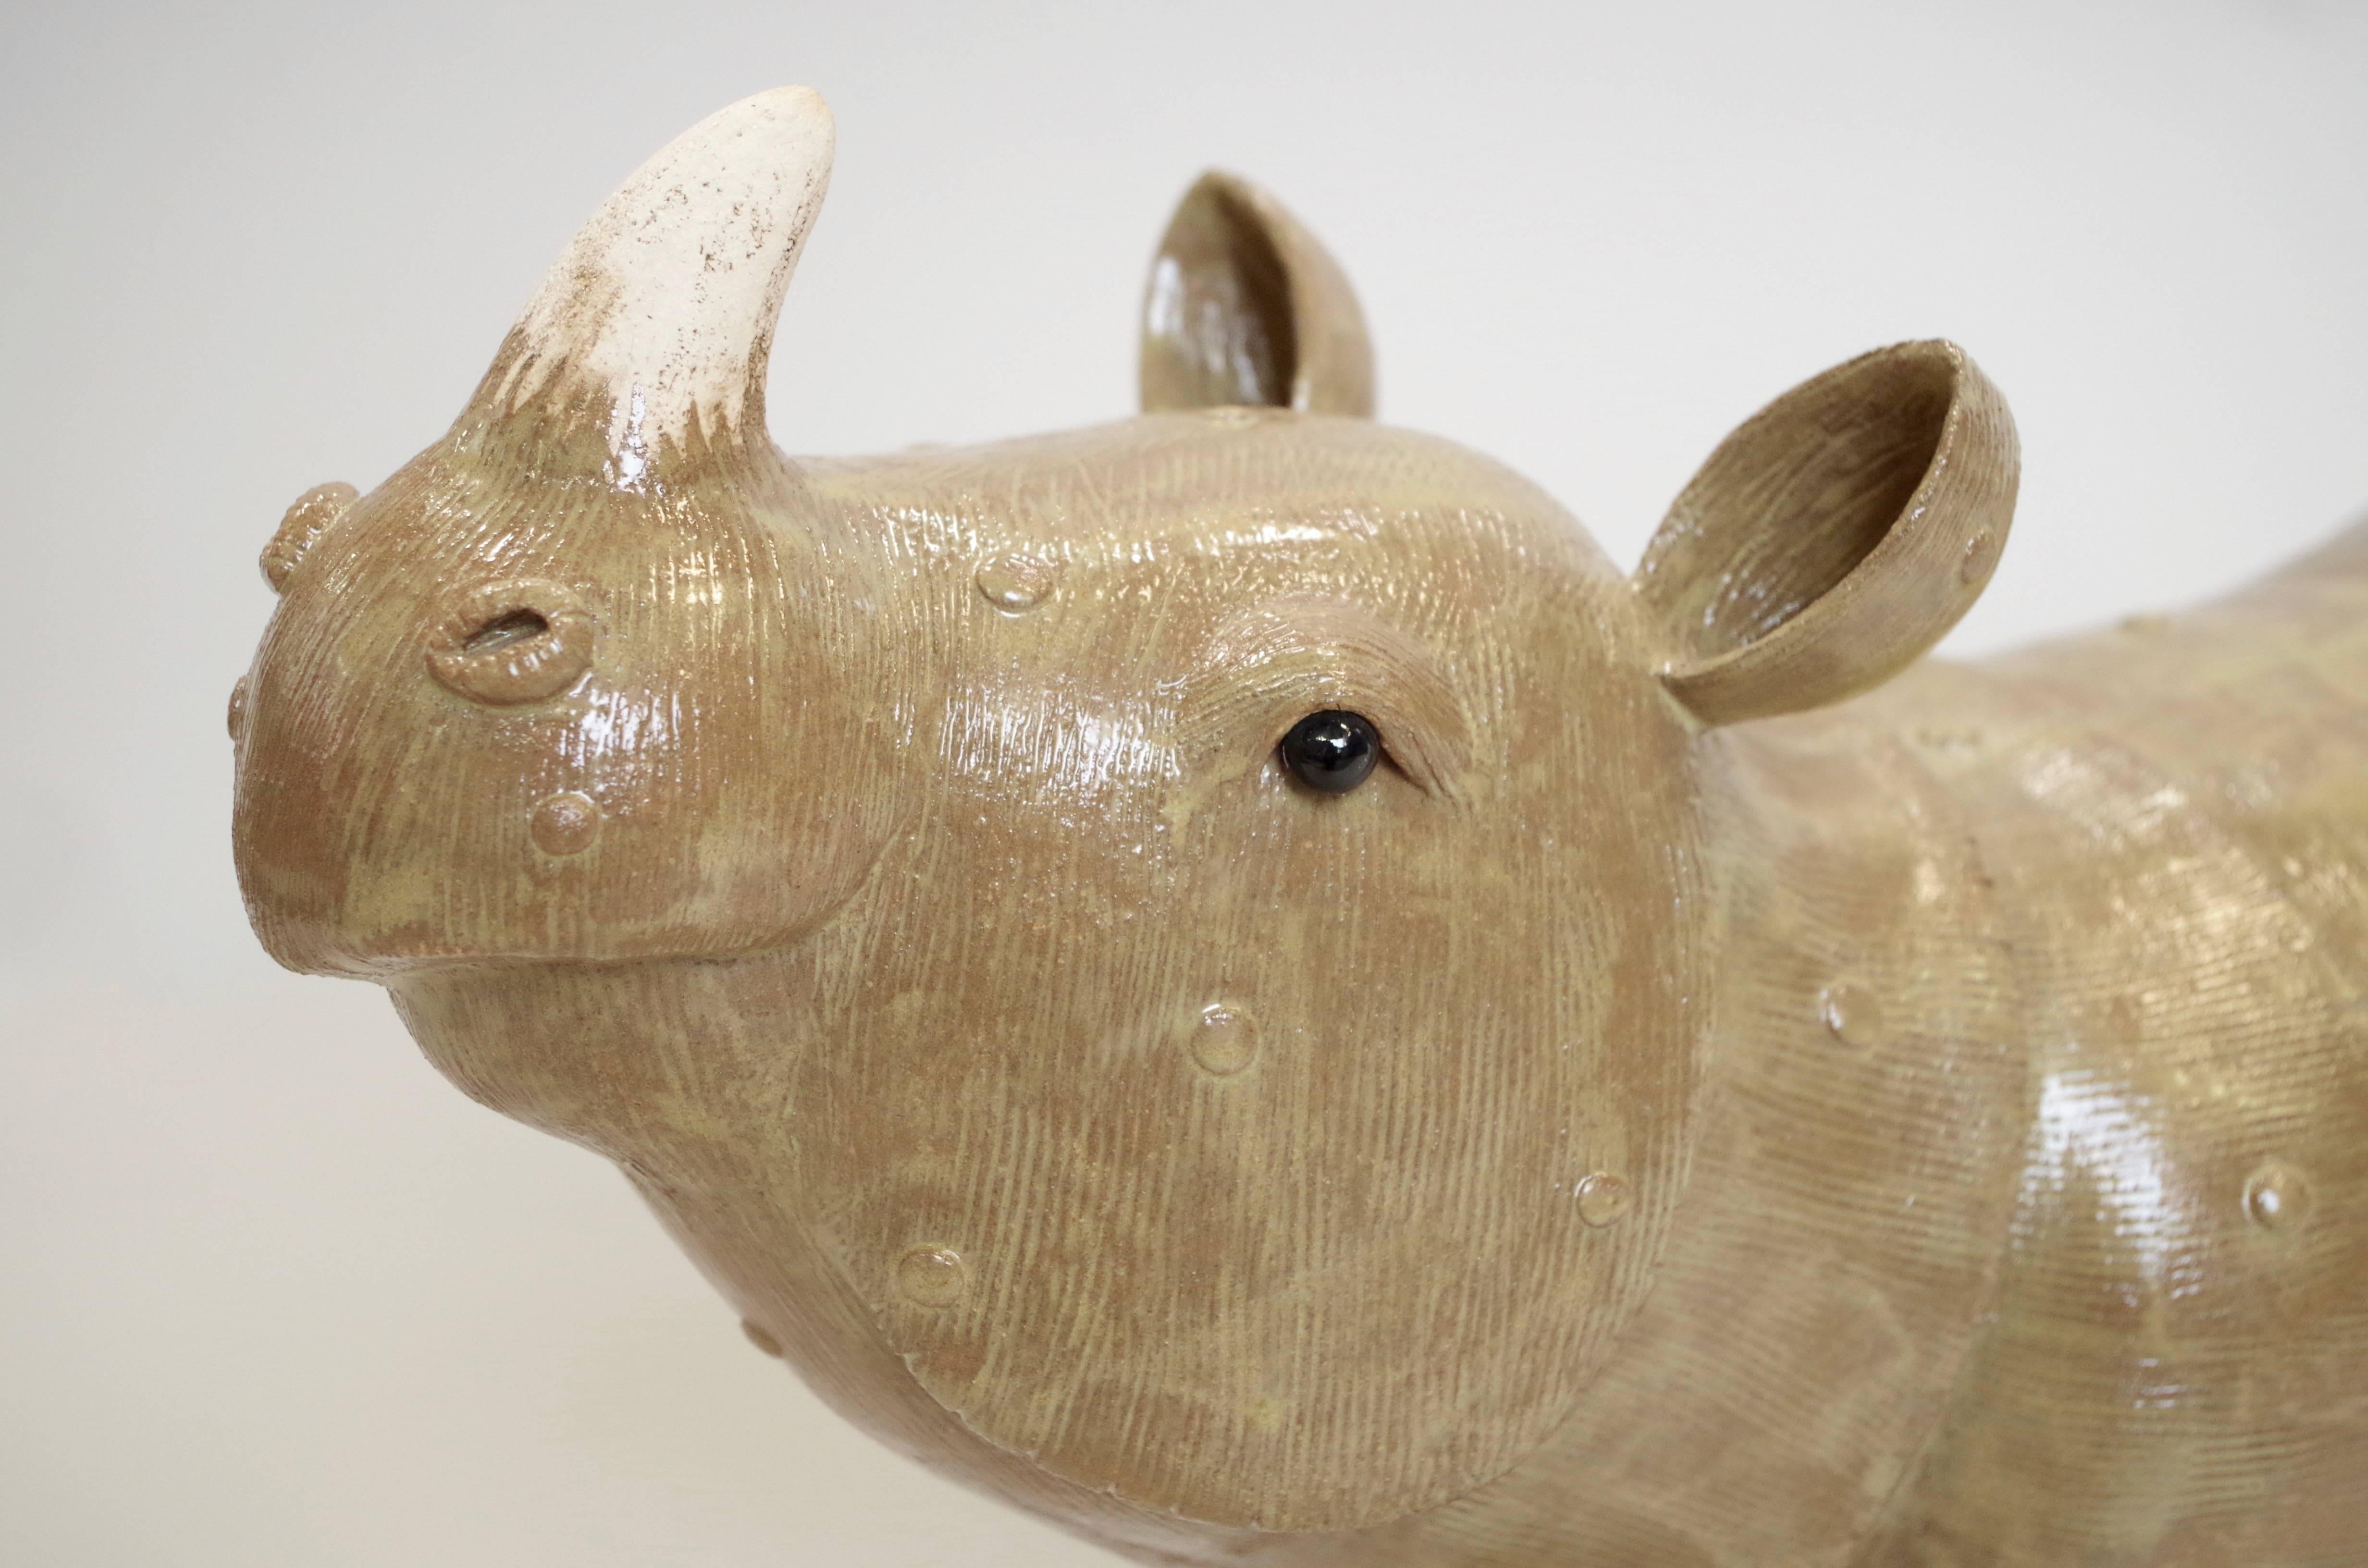 Rhinoceros sculpture in glazed stoneware. 
This sculpture is made by the French contemporaneous artist Valérie Couret. 
She learned with Jacques Peiffer, Meilleur Ouvrier de France, in the Saint-Jean l'Aigle de Longwy Manufactory, how to apprehend